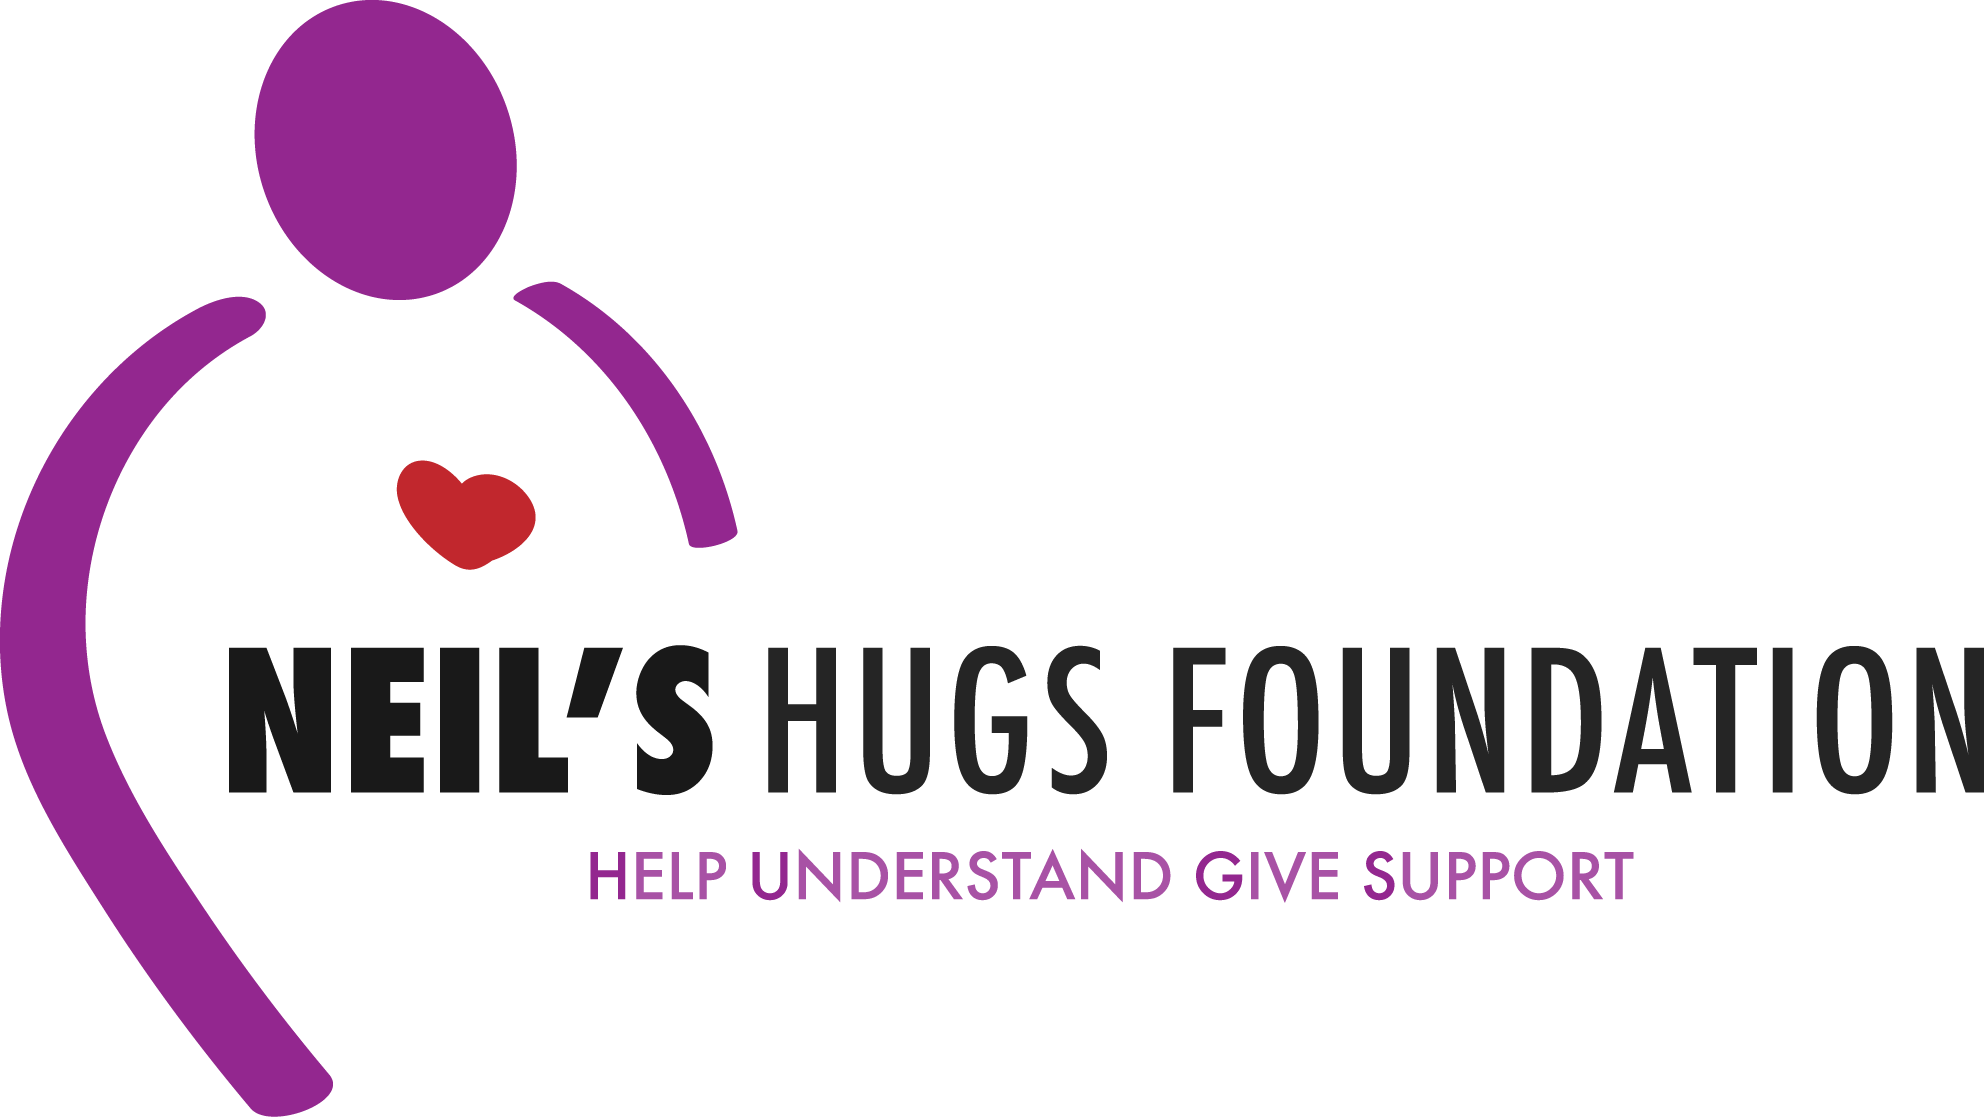 Support given by. Support Charity. Charity Foundation logo.